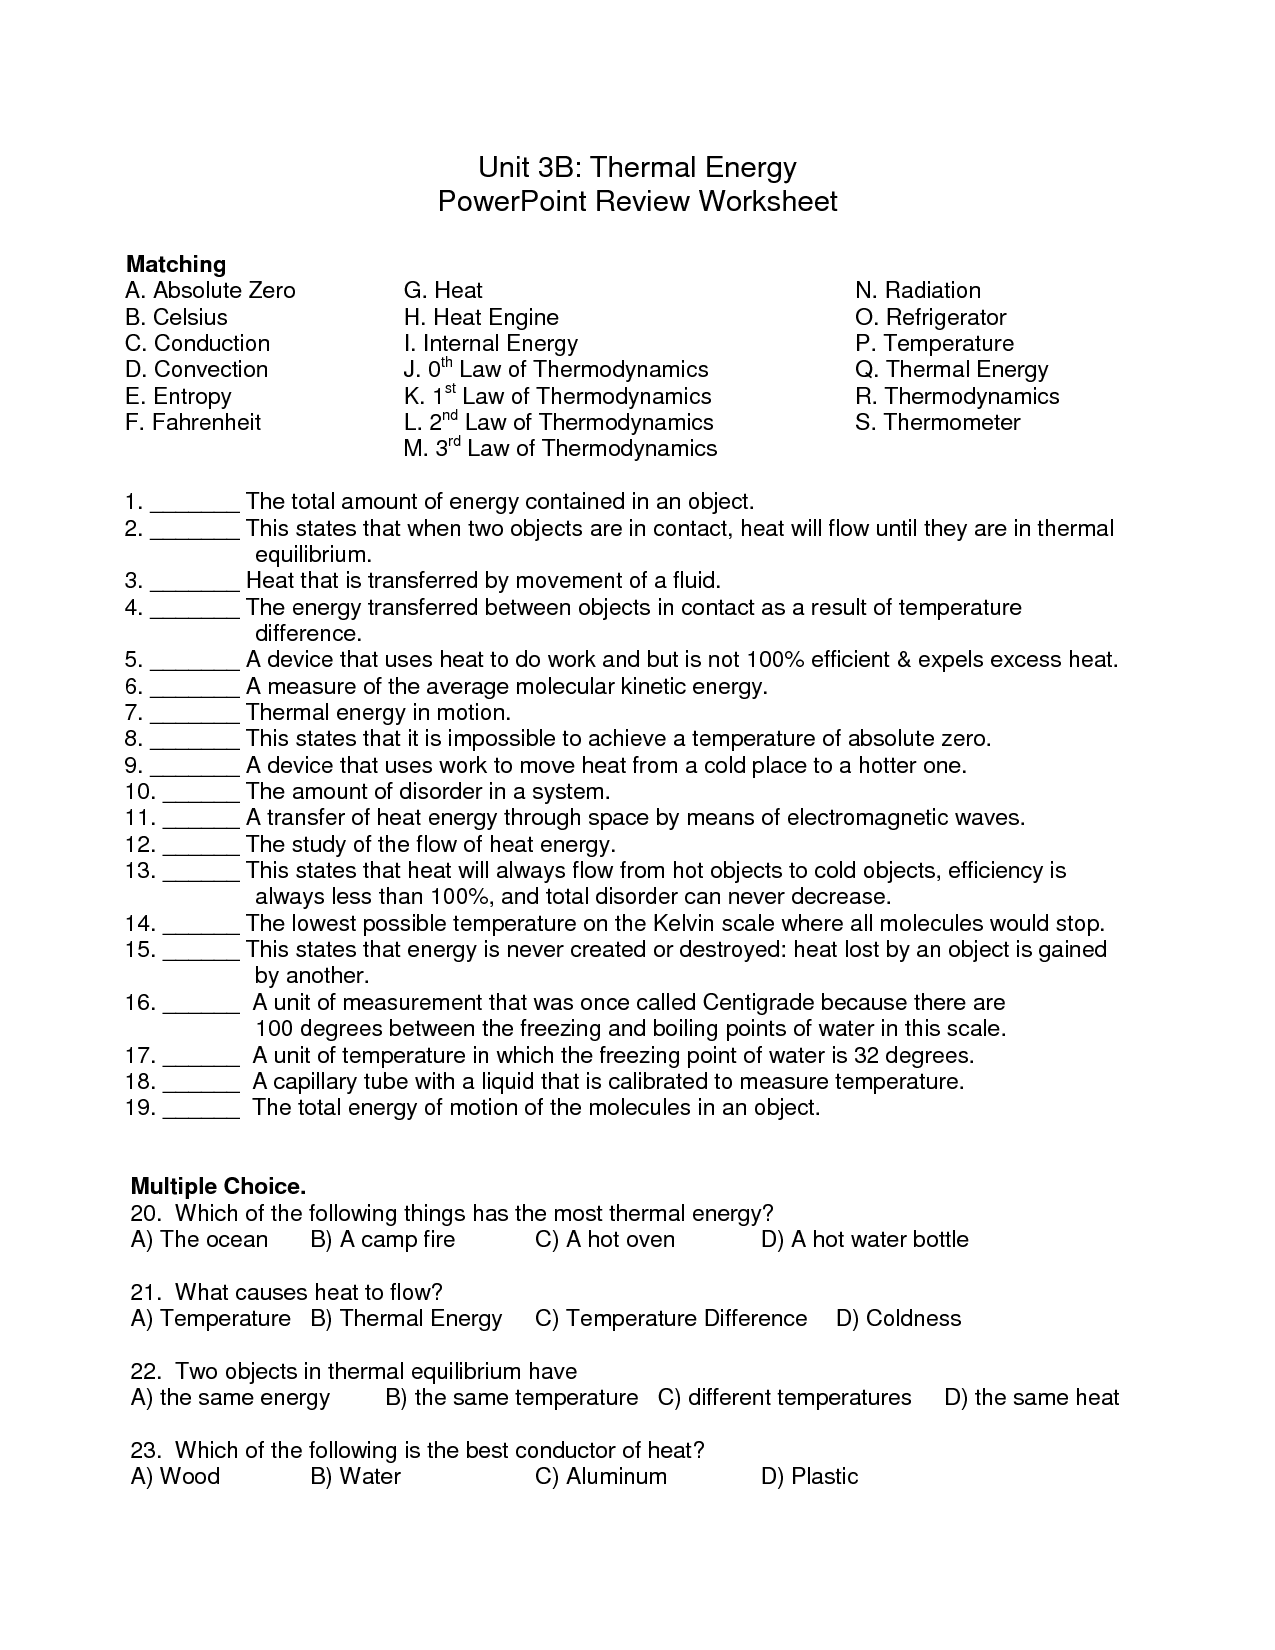 Thermal Energy Transfer Worksheet Answers Image